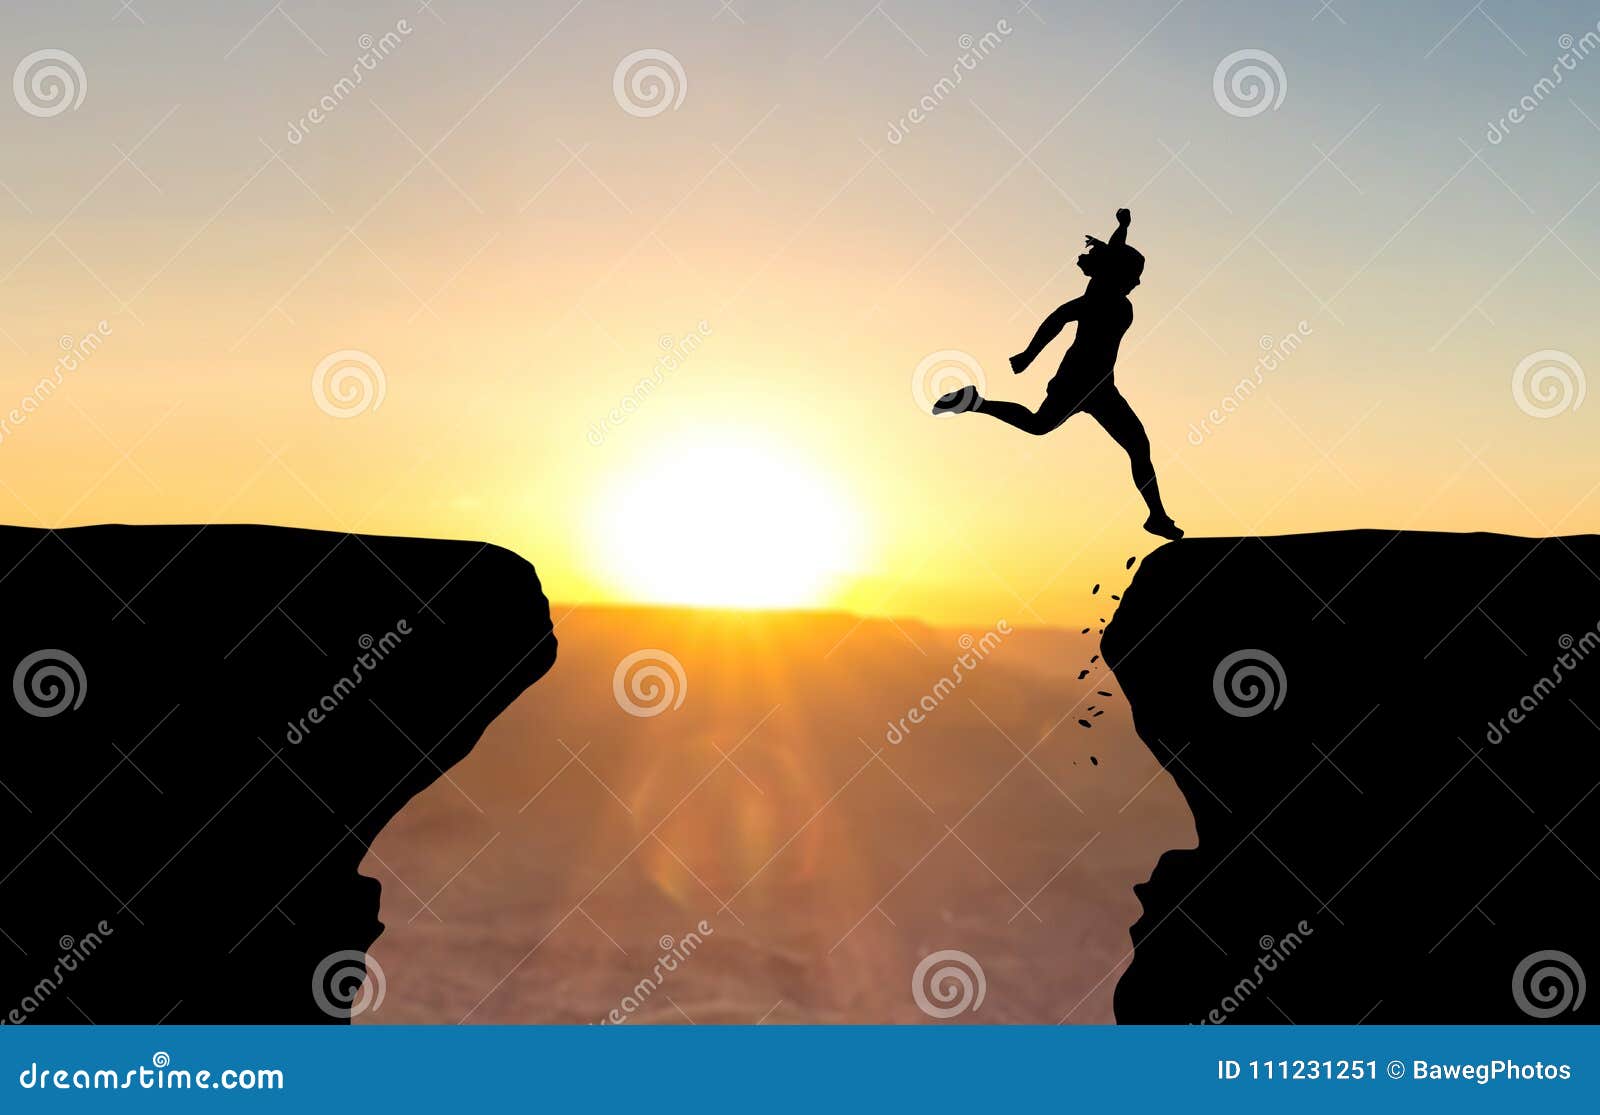 woman landing after jump over abyss.